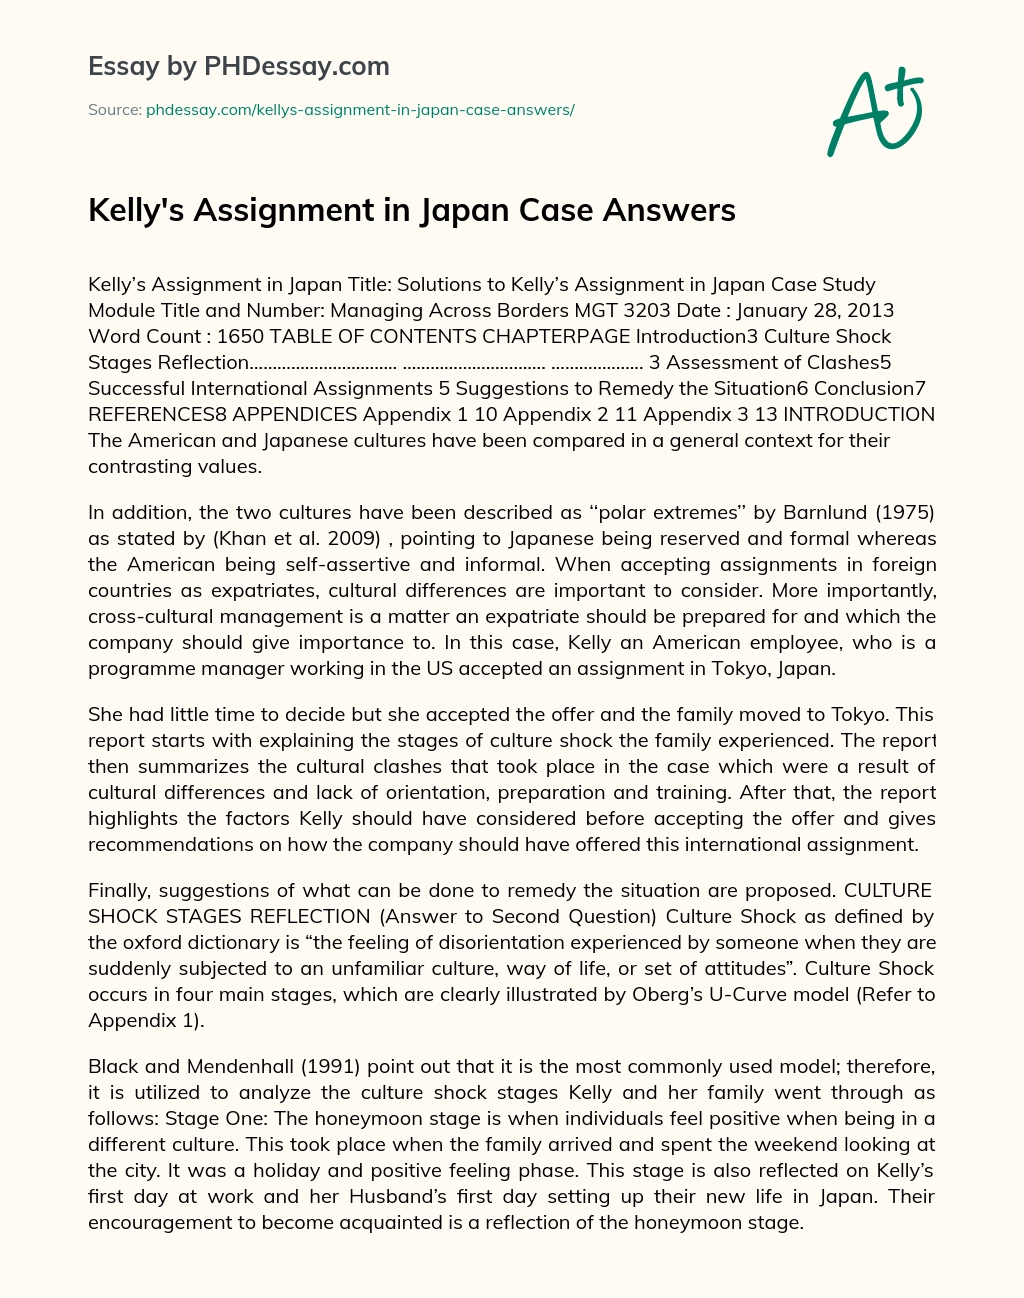 Kelly’s Assignment in Japan Case Answers essay